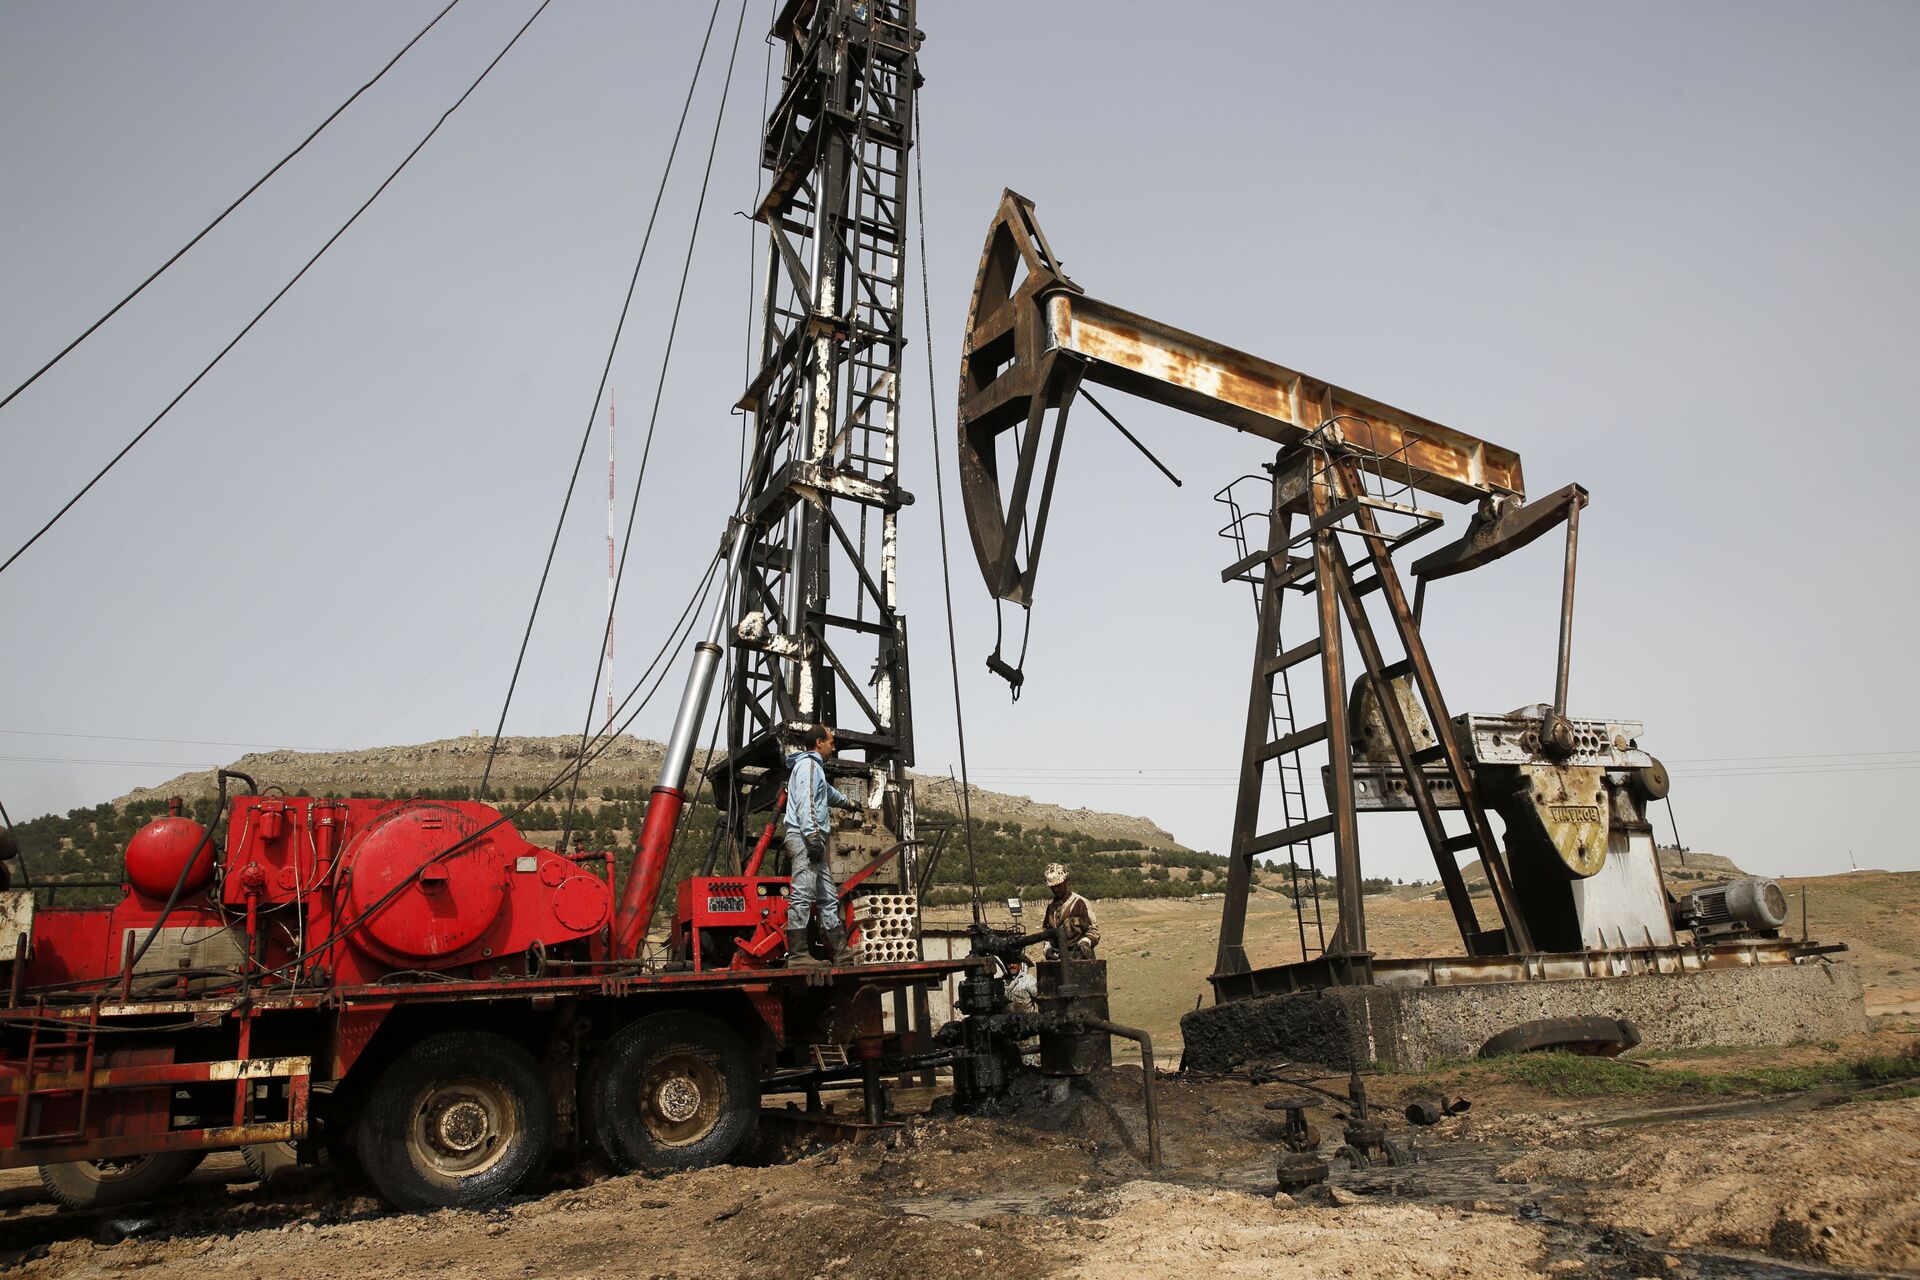 This March 27, 2018 file photo shows Syrian workers fixing pipes of an oil well at an oil field controlled by a U.S-backed Kurdish group, in Rmeilan, Hassakeh province, Syria. - Sputnik International, 1920, 07.09.2021